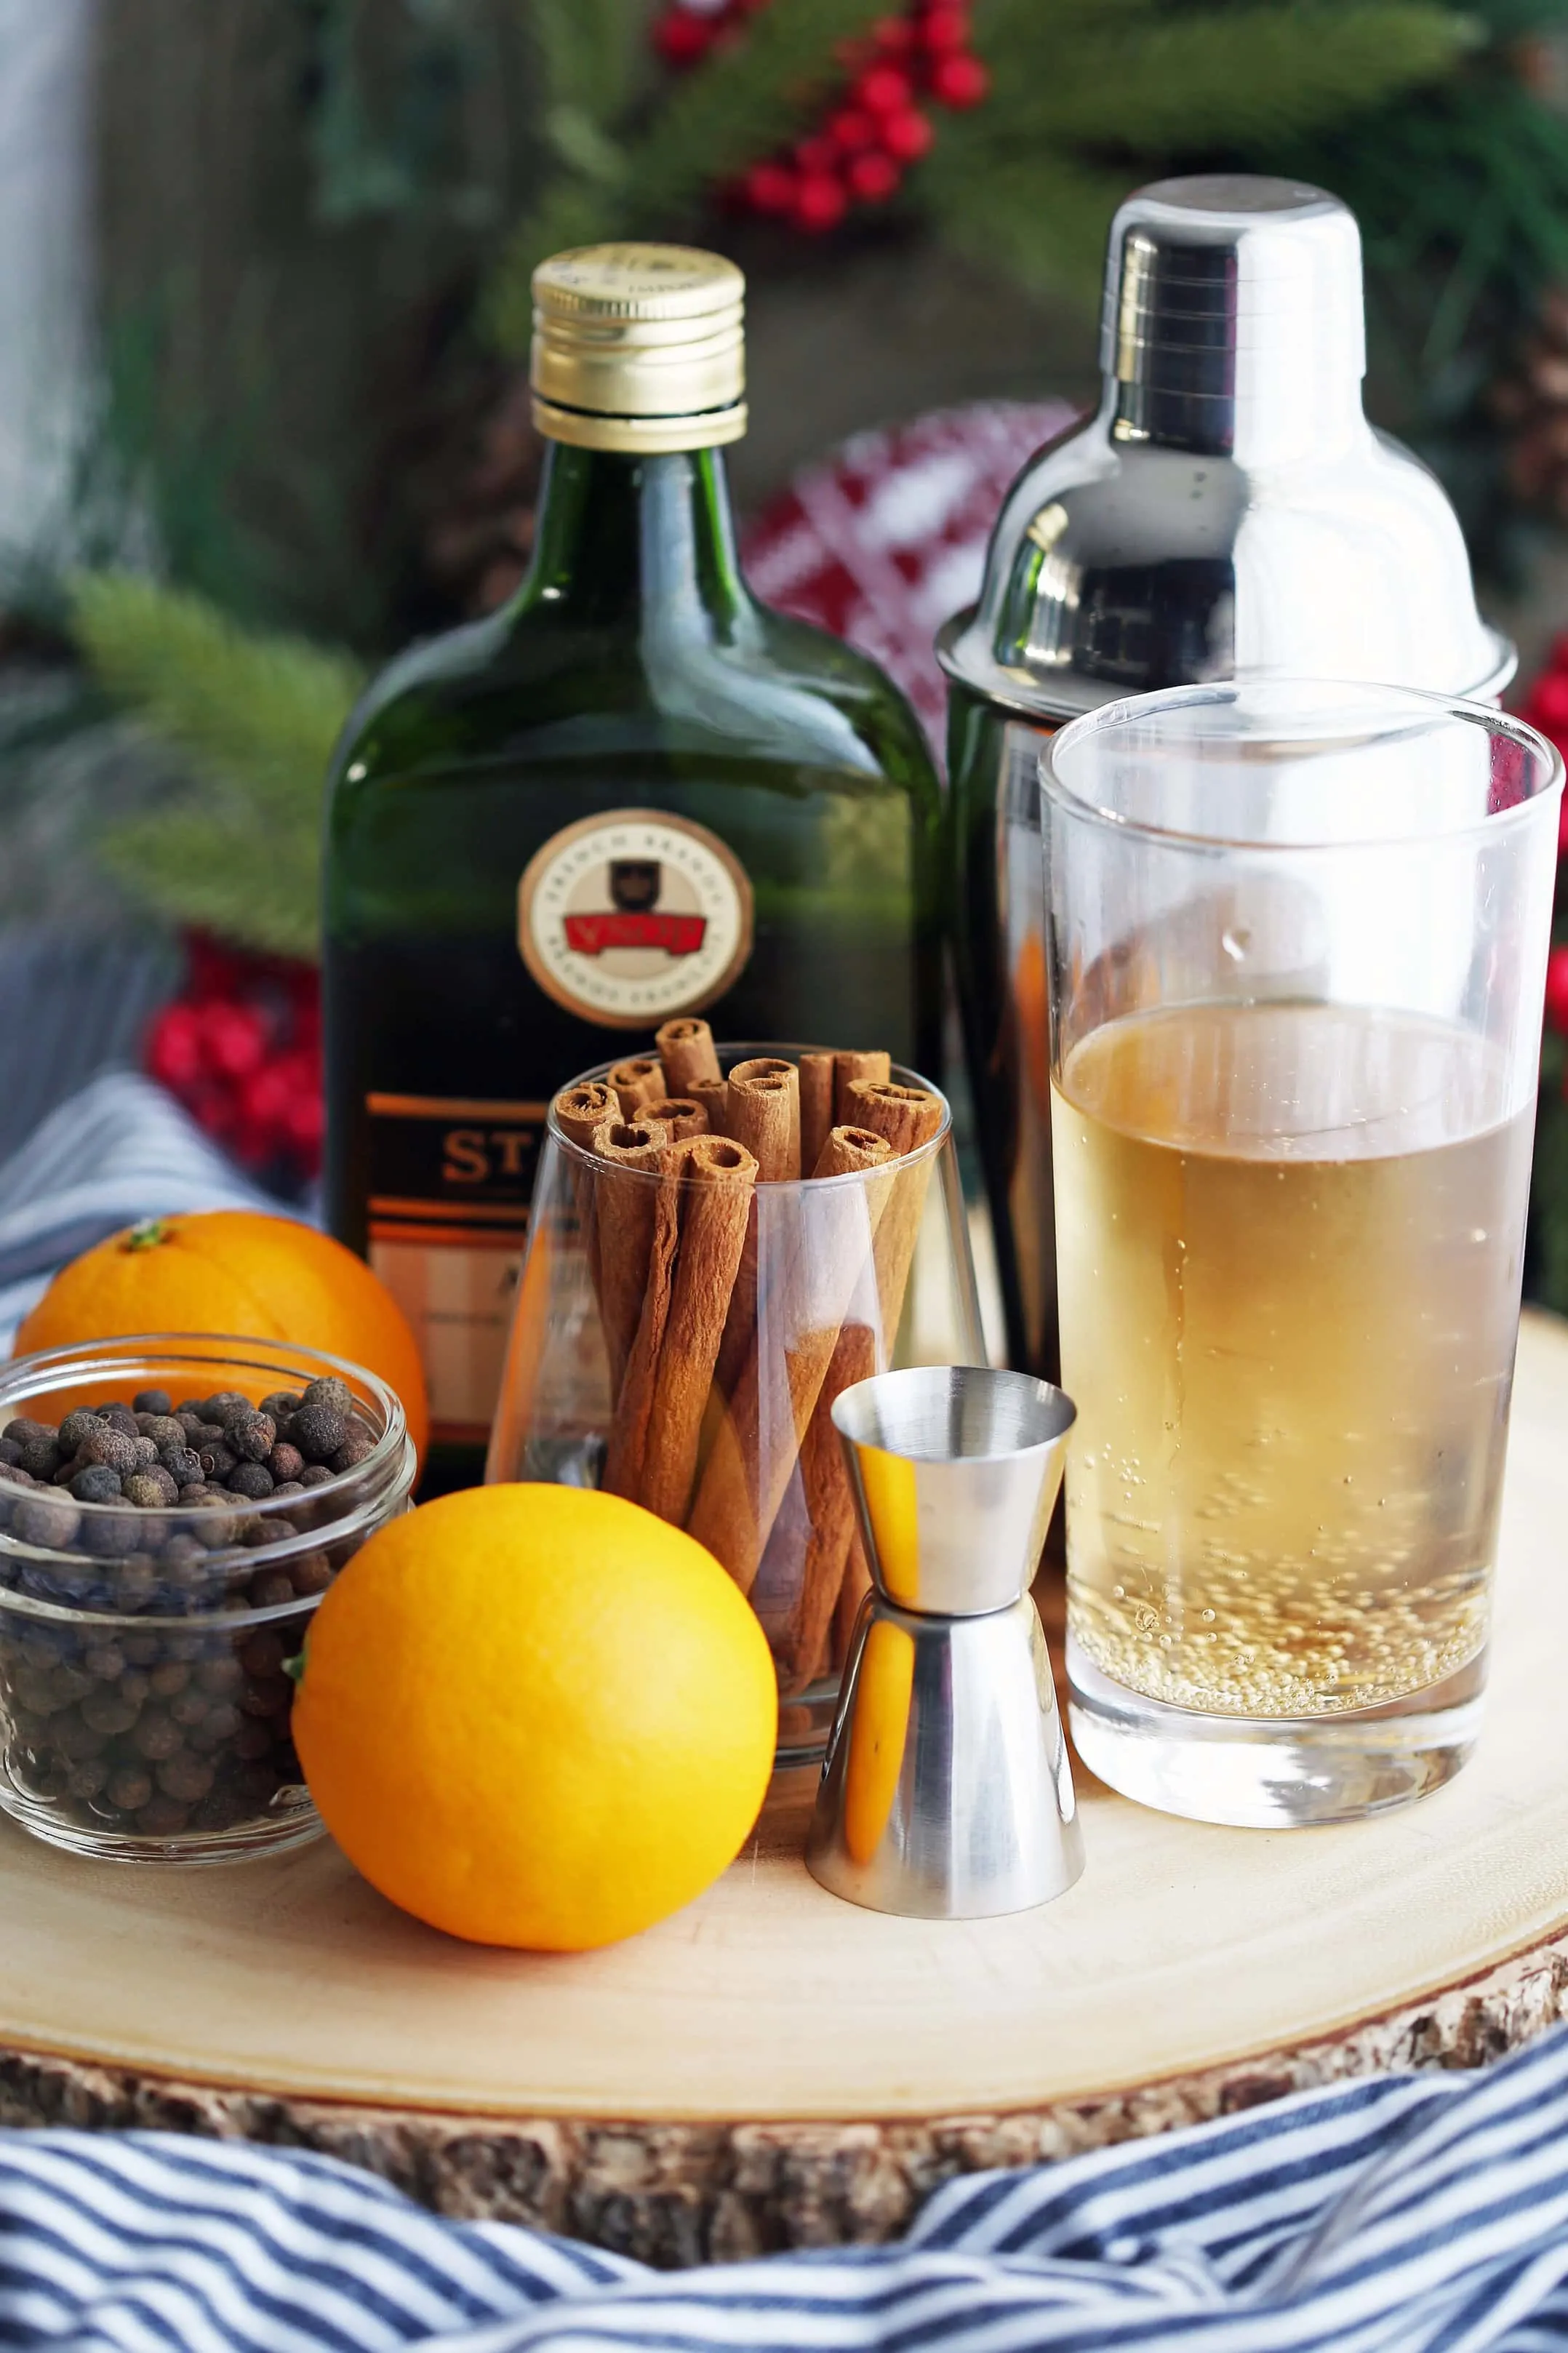 Whole allspice berries, cinnamon sticks, a bottle of Brandy, an orange, a glass of ginger ale, and a cocktail shaker on a wooden platter.